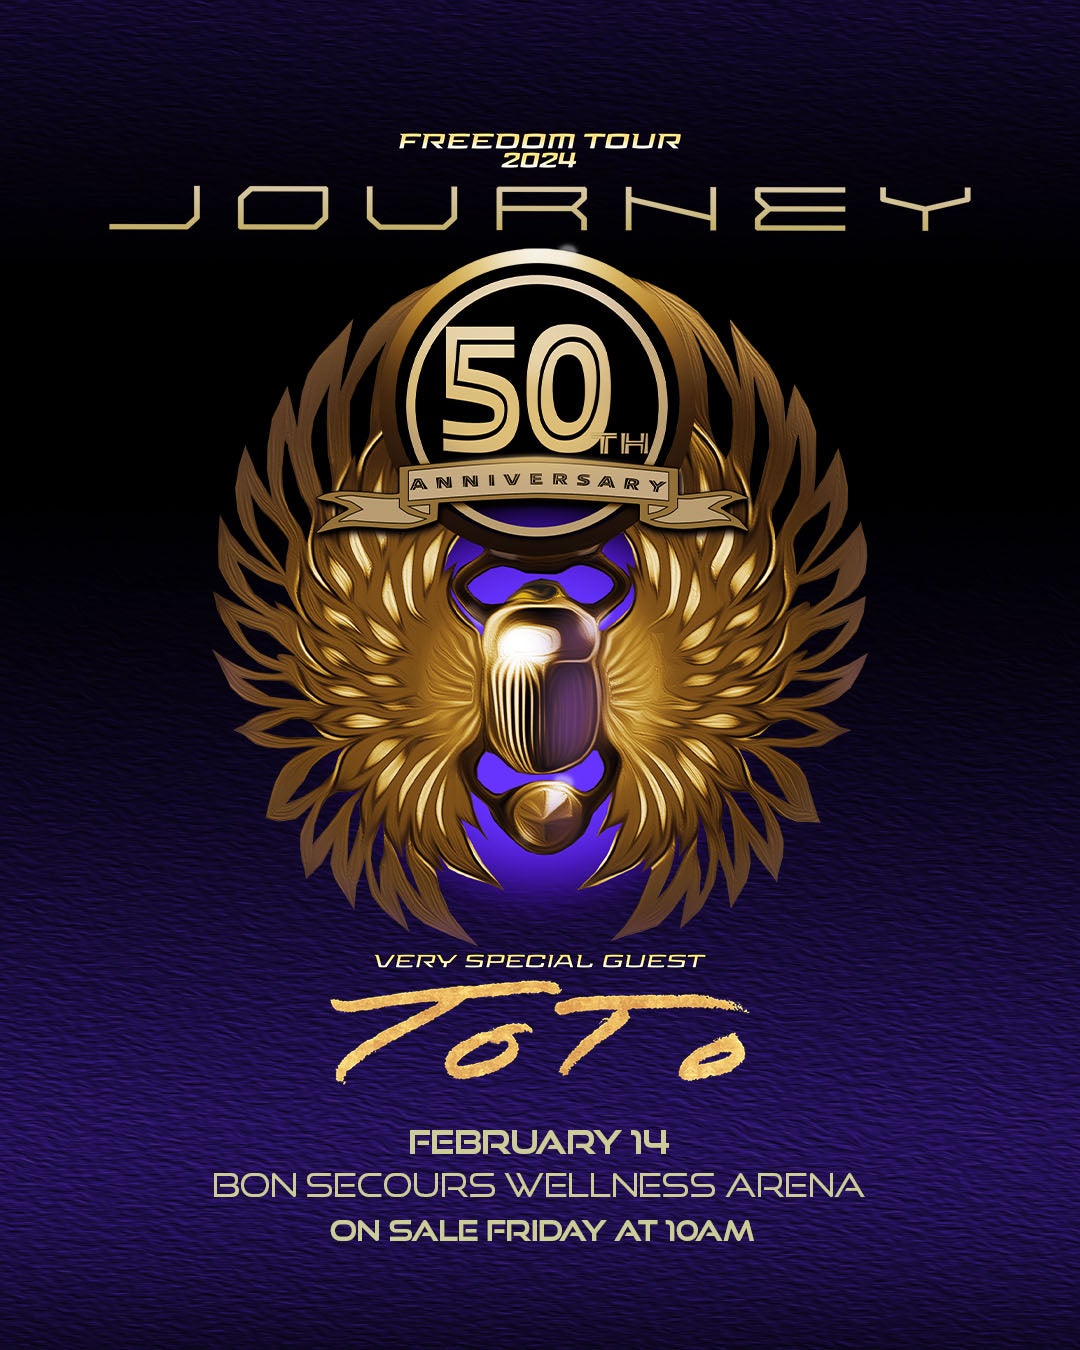 is journey going to tour in 2024